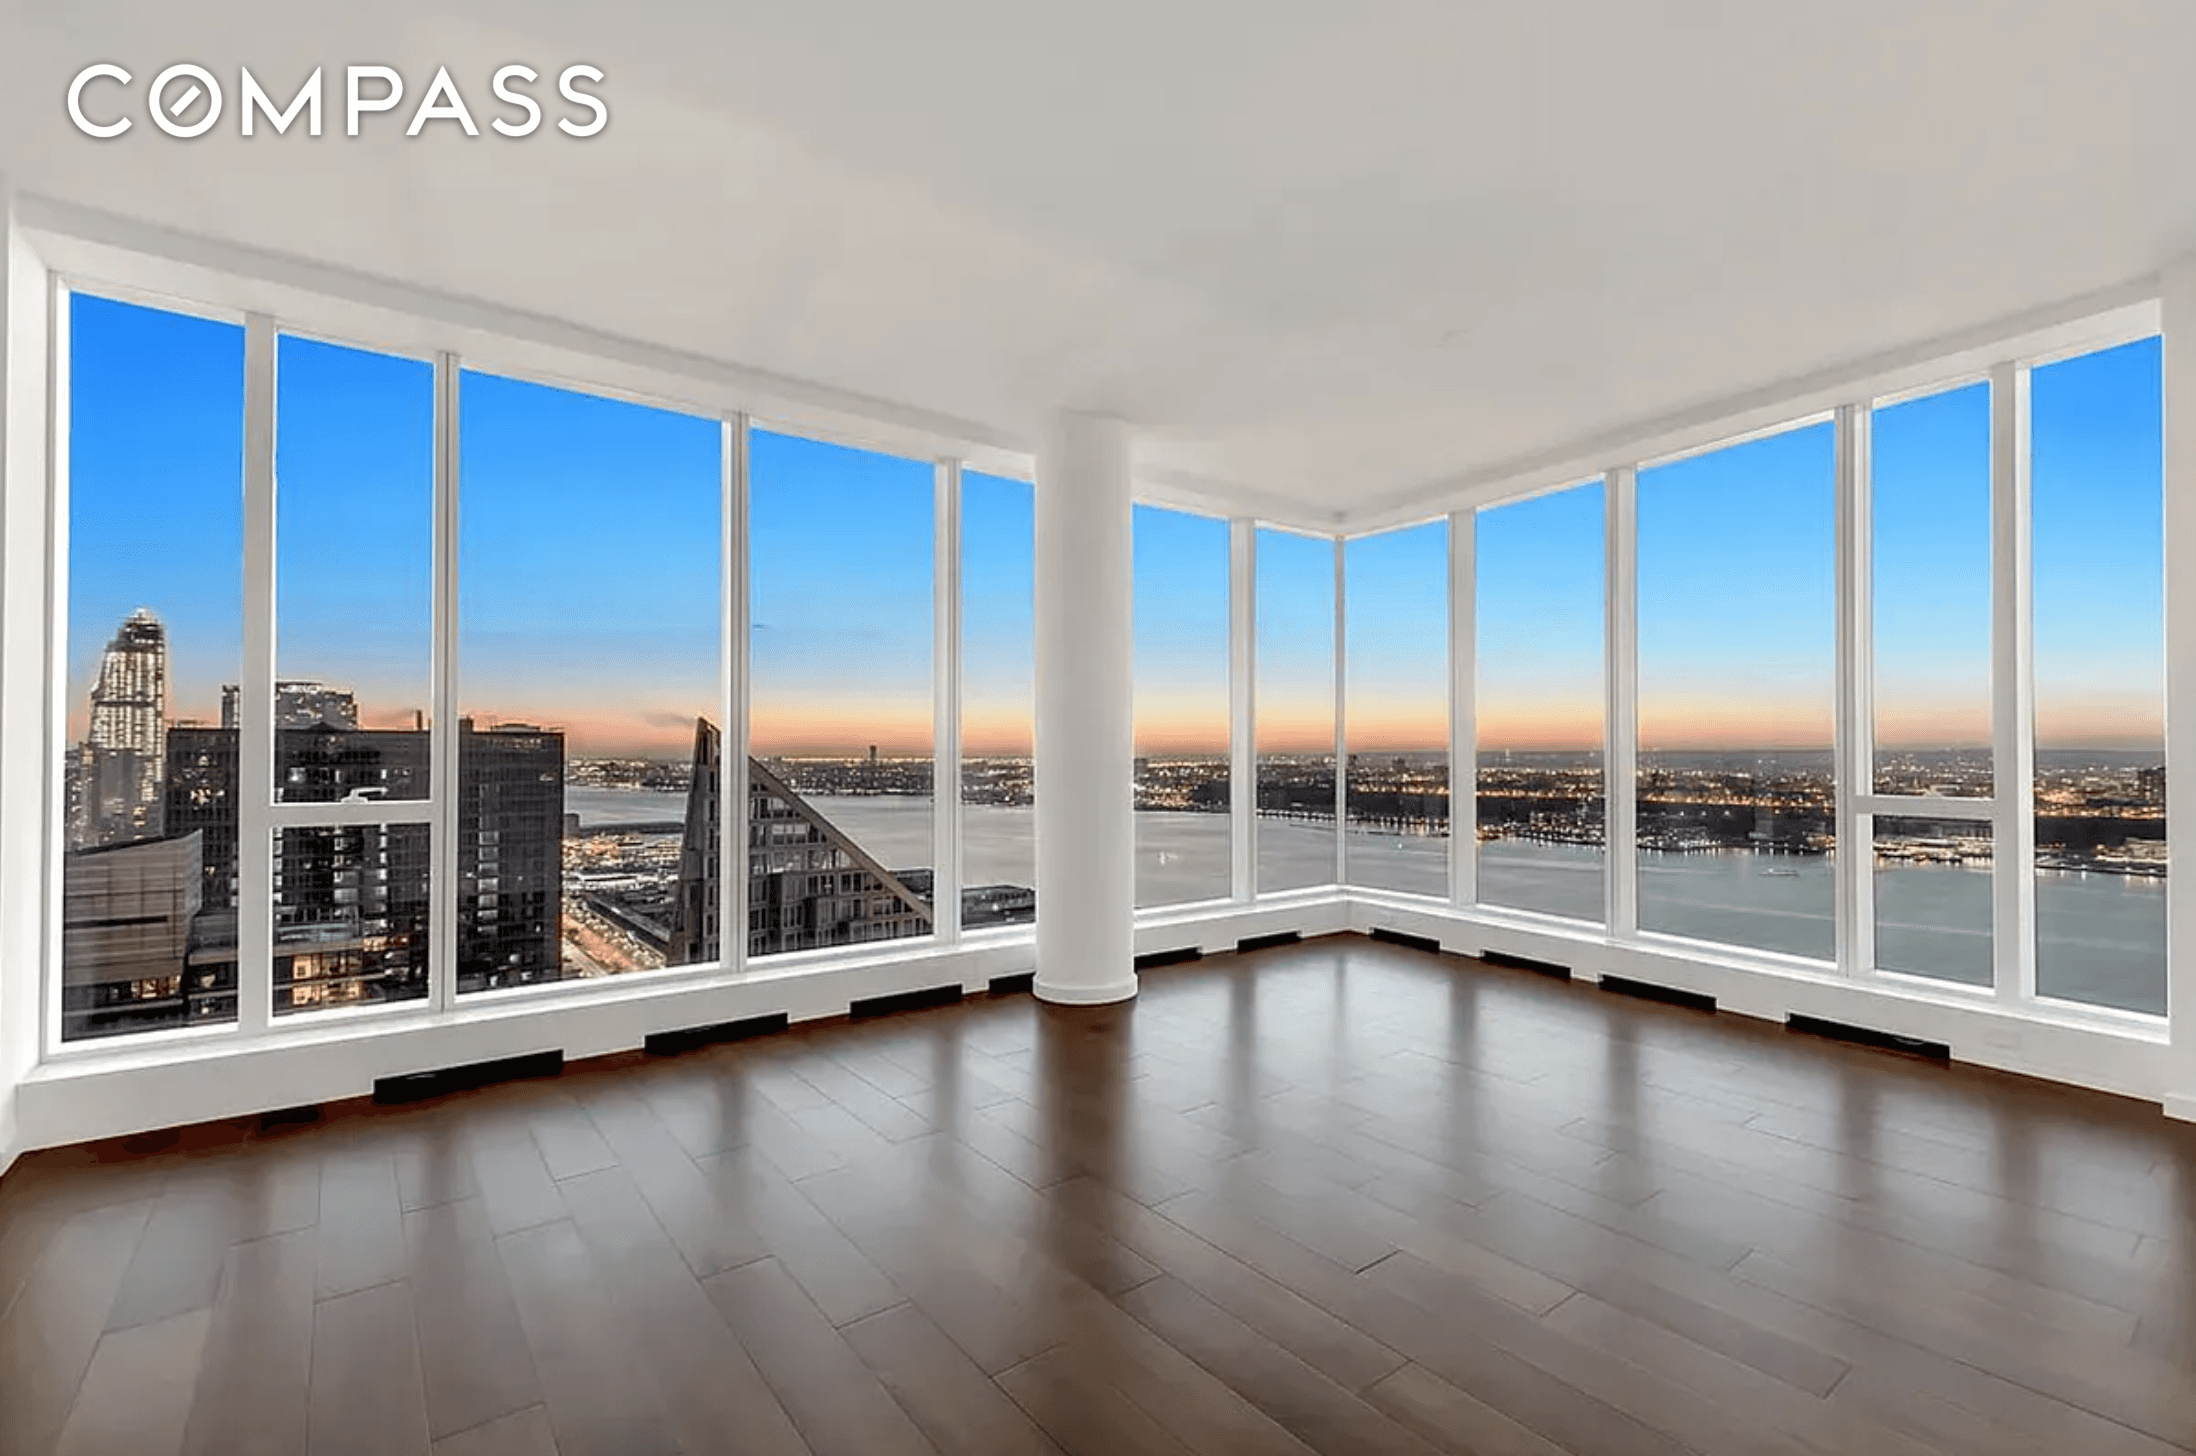 Welcome to the largest and most beautiful apartment currently offered for rent at 1 West End Avenue.